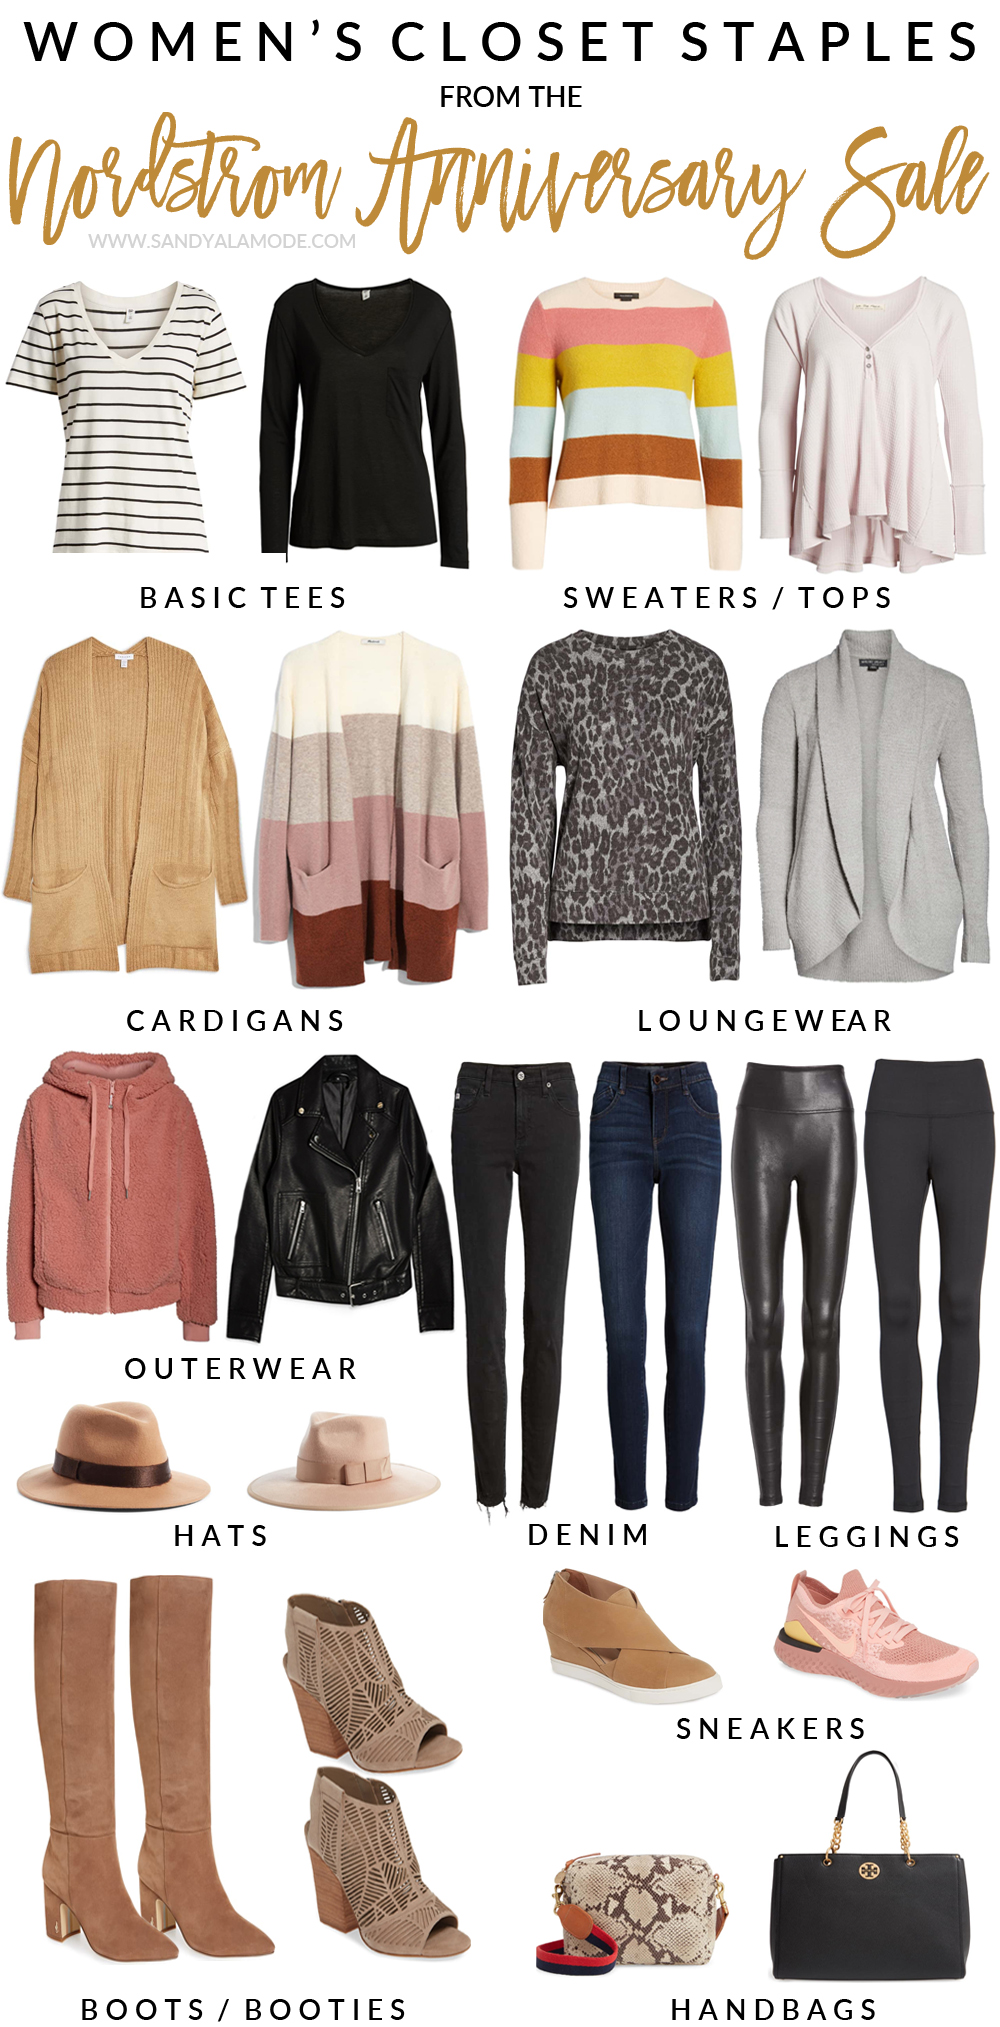 Women's Closet Staples From The Nordstrom Anniversary Sale